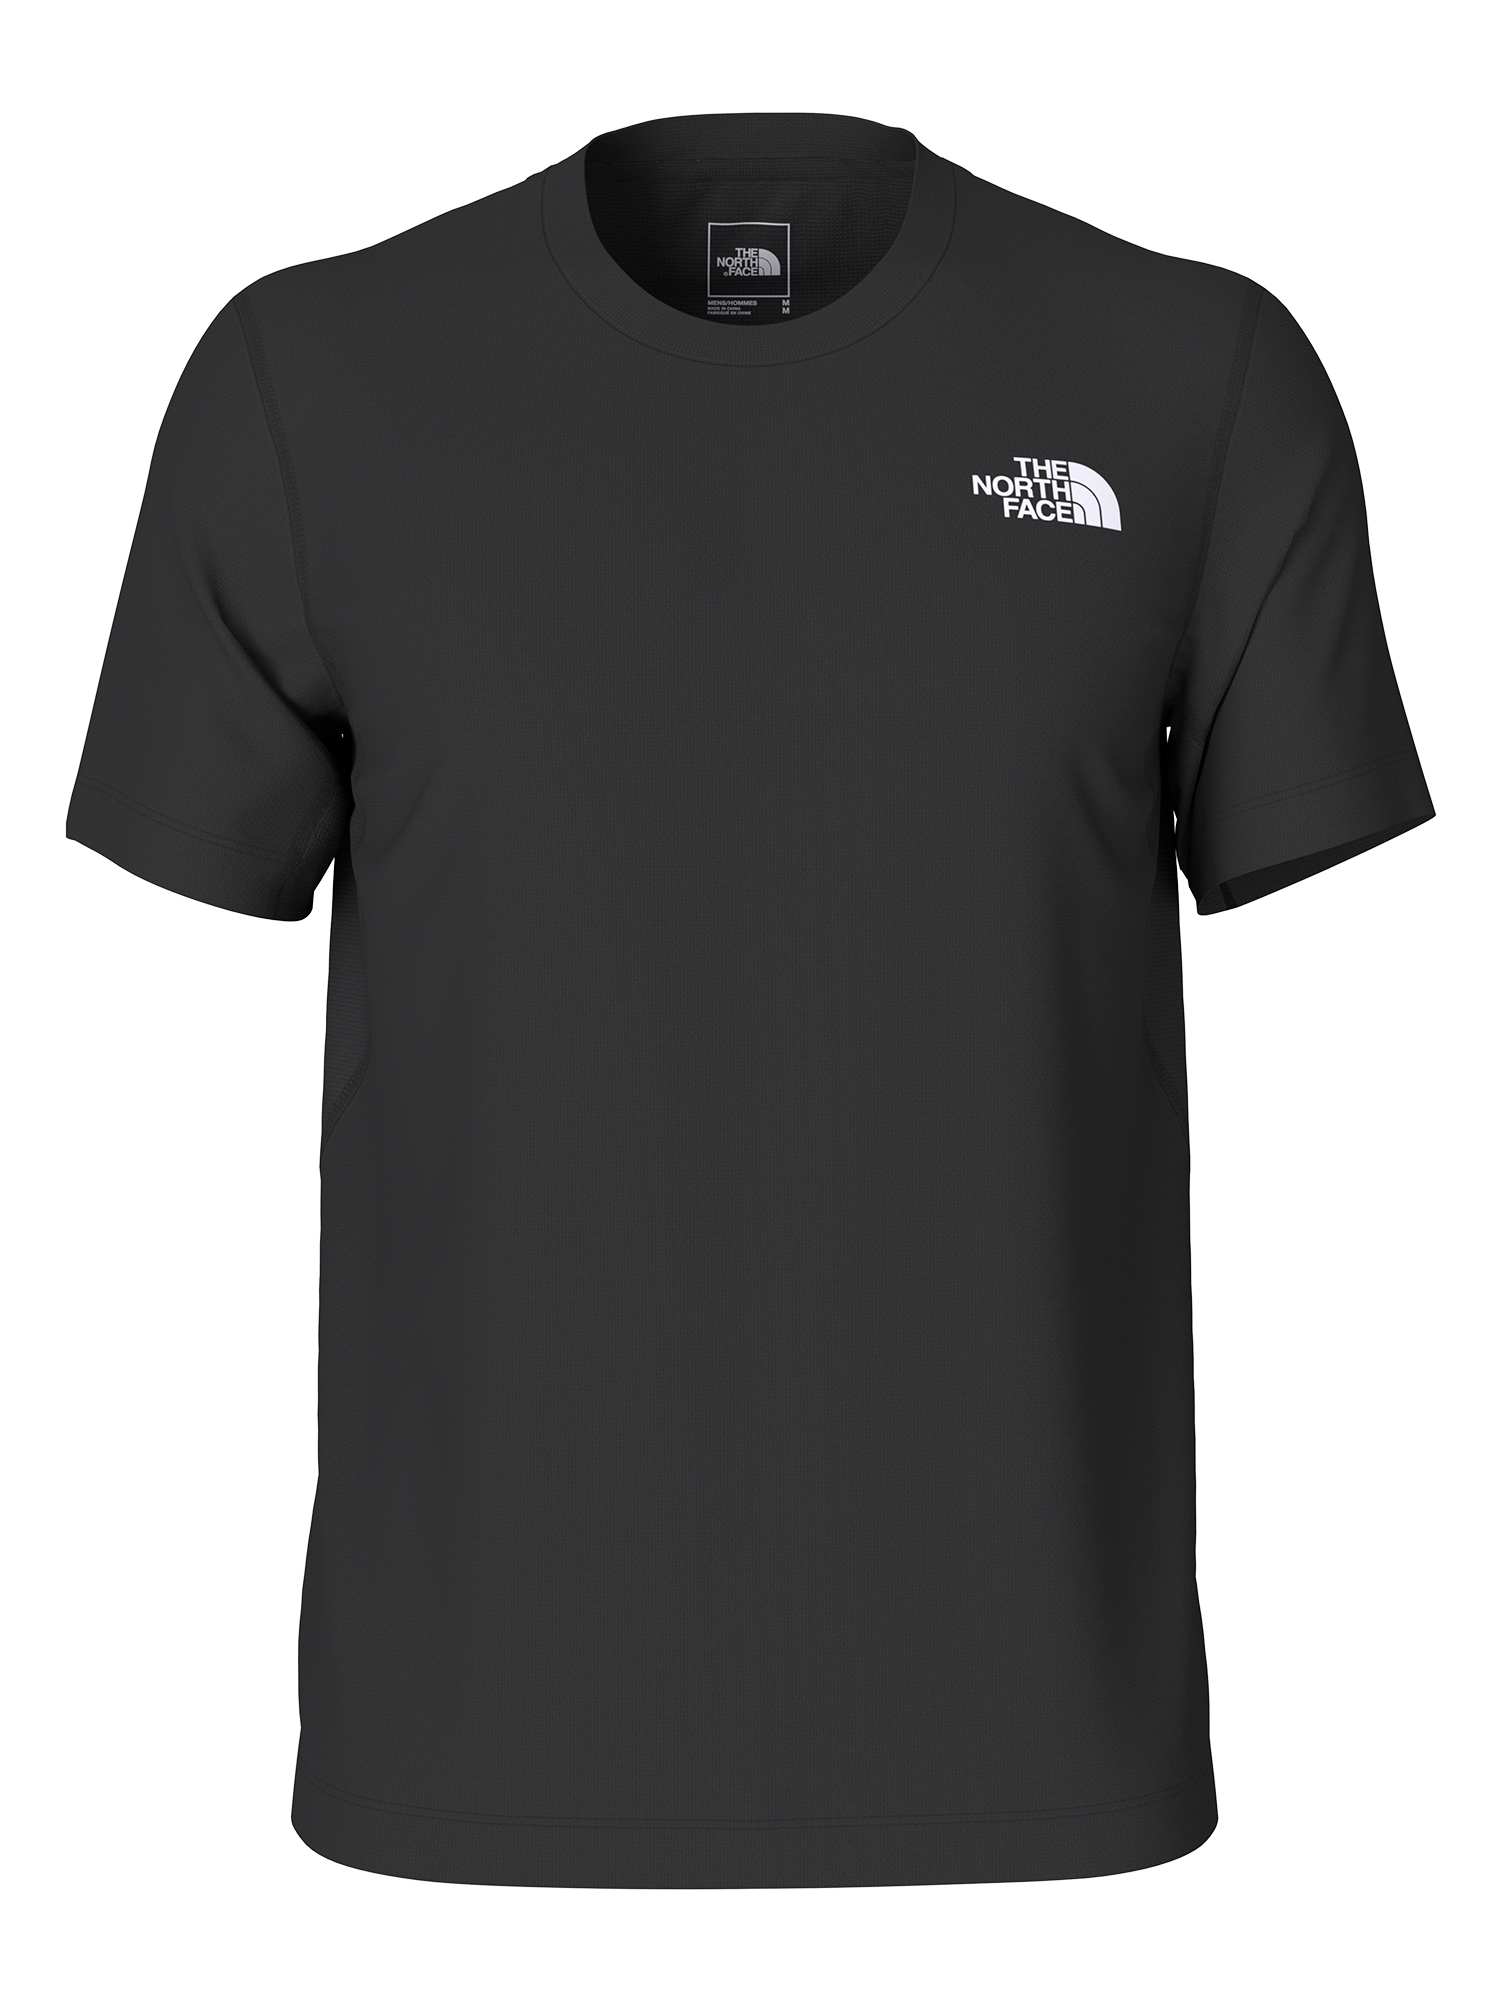 The North Face S/S Men's T-Shirt -